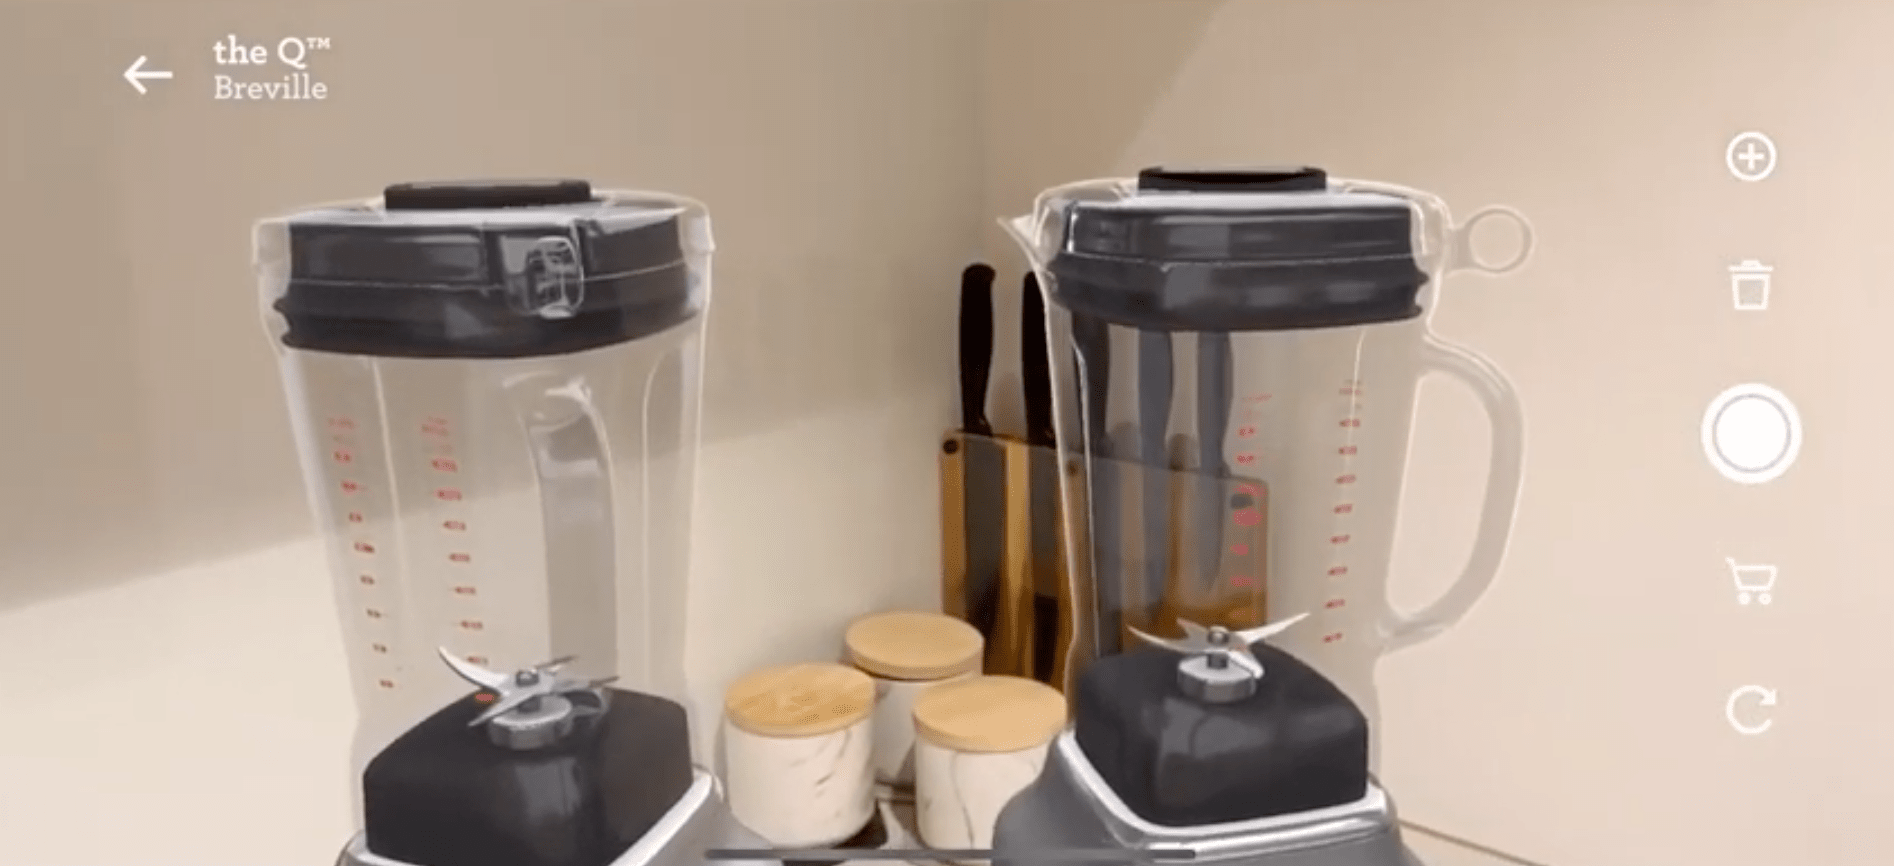 Kitchen appliances are supporte by AR technology